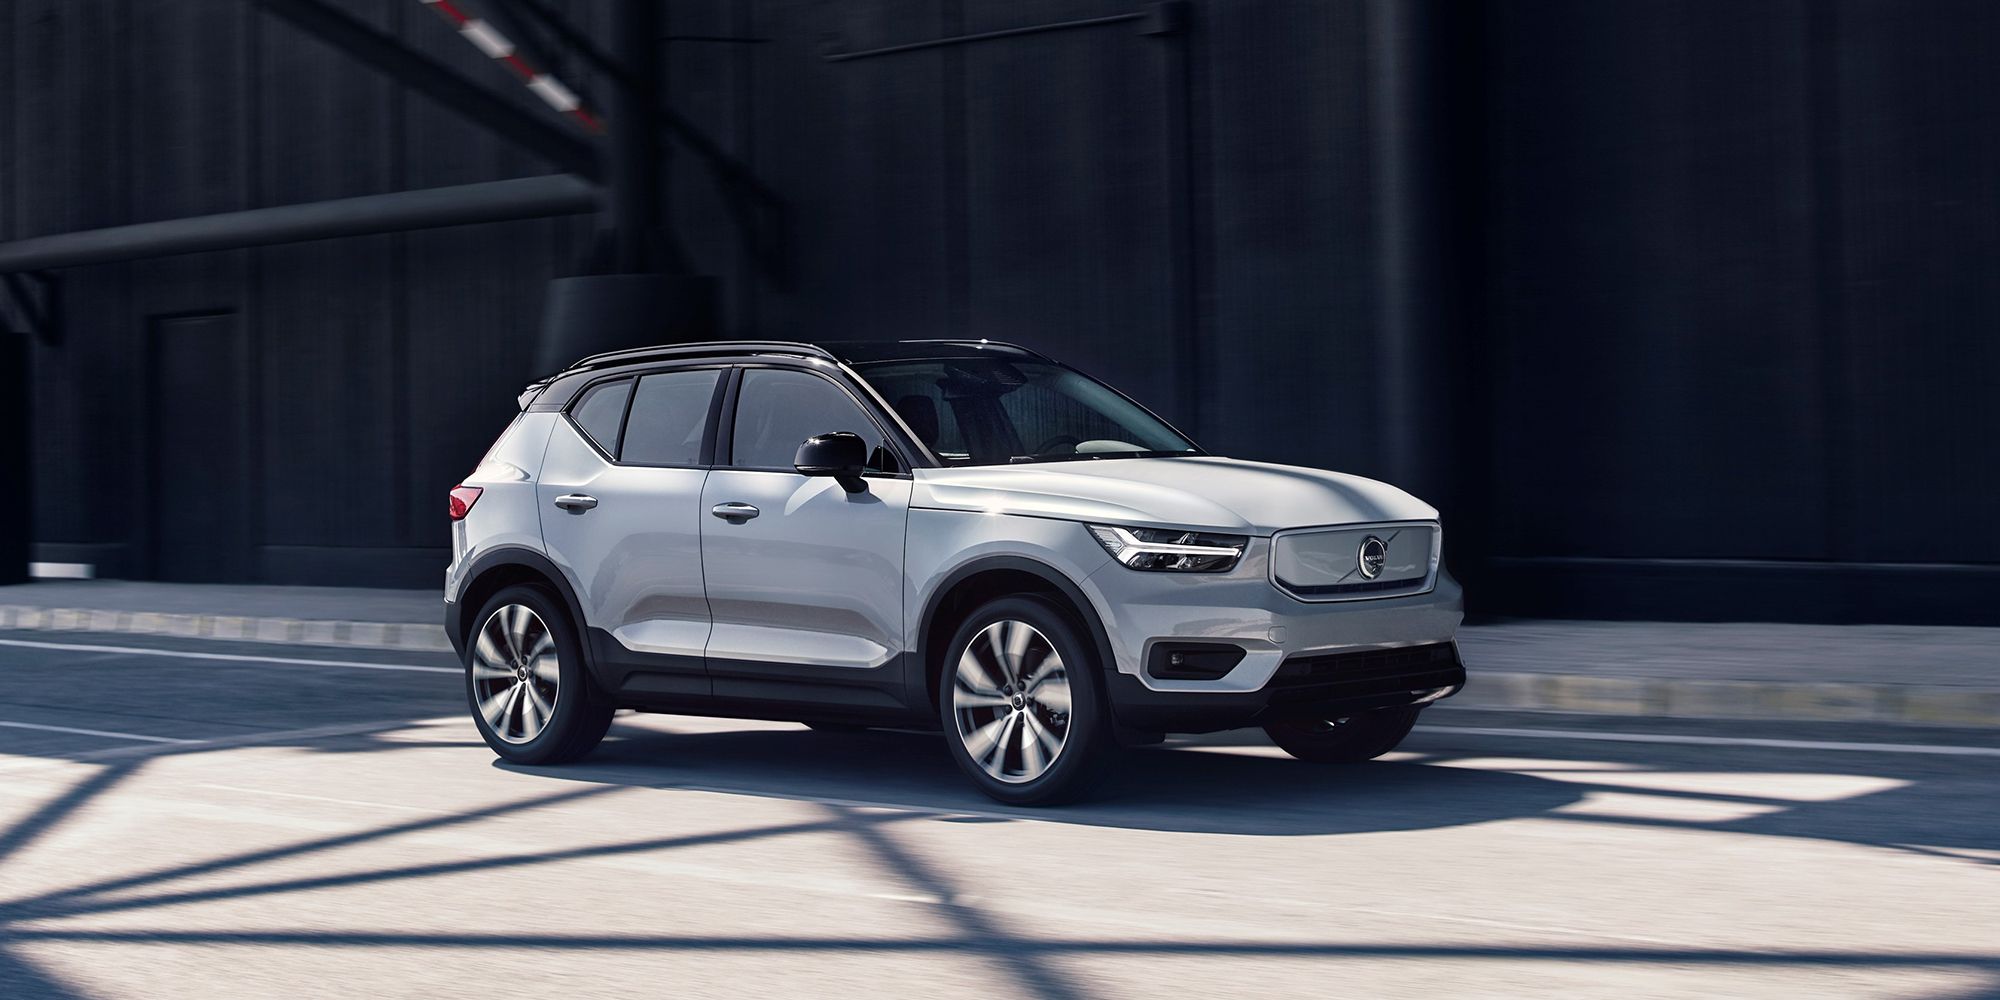 The XC40 Recharge in white